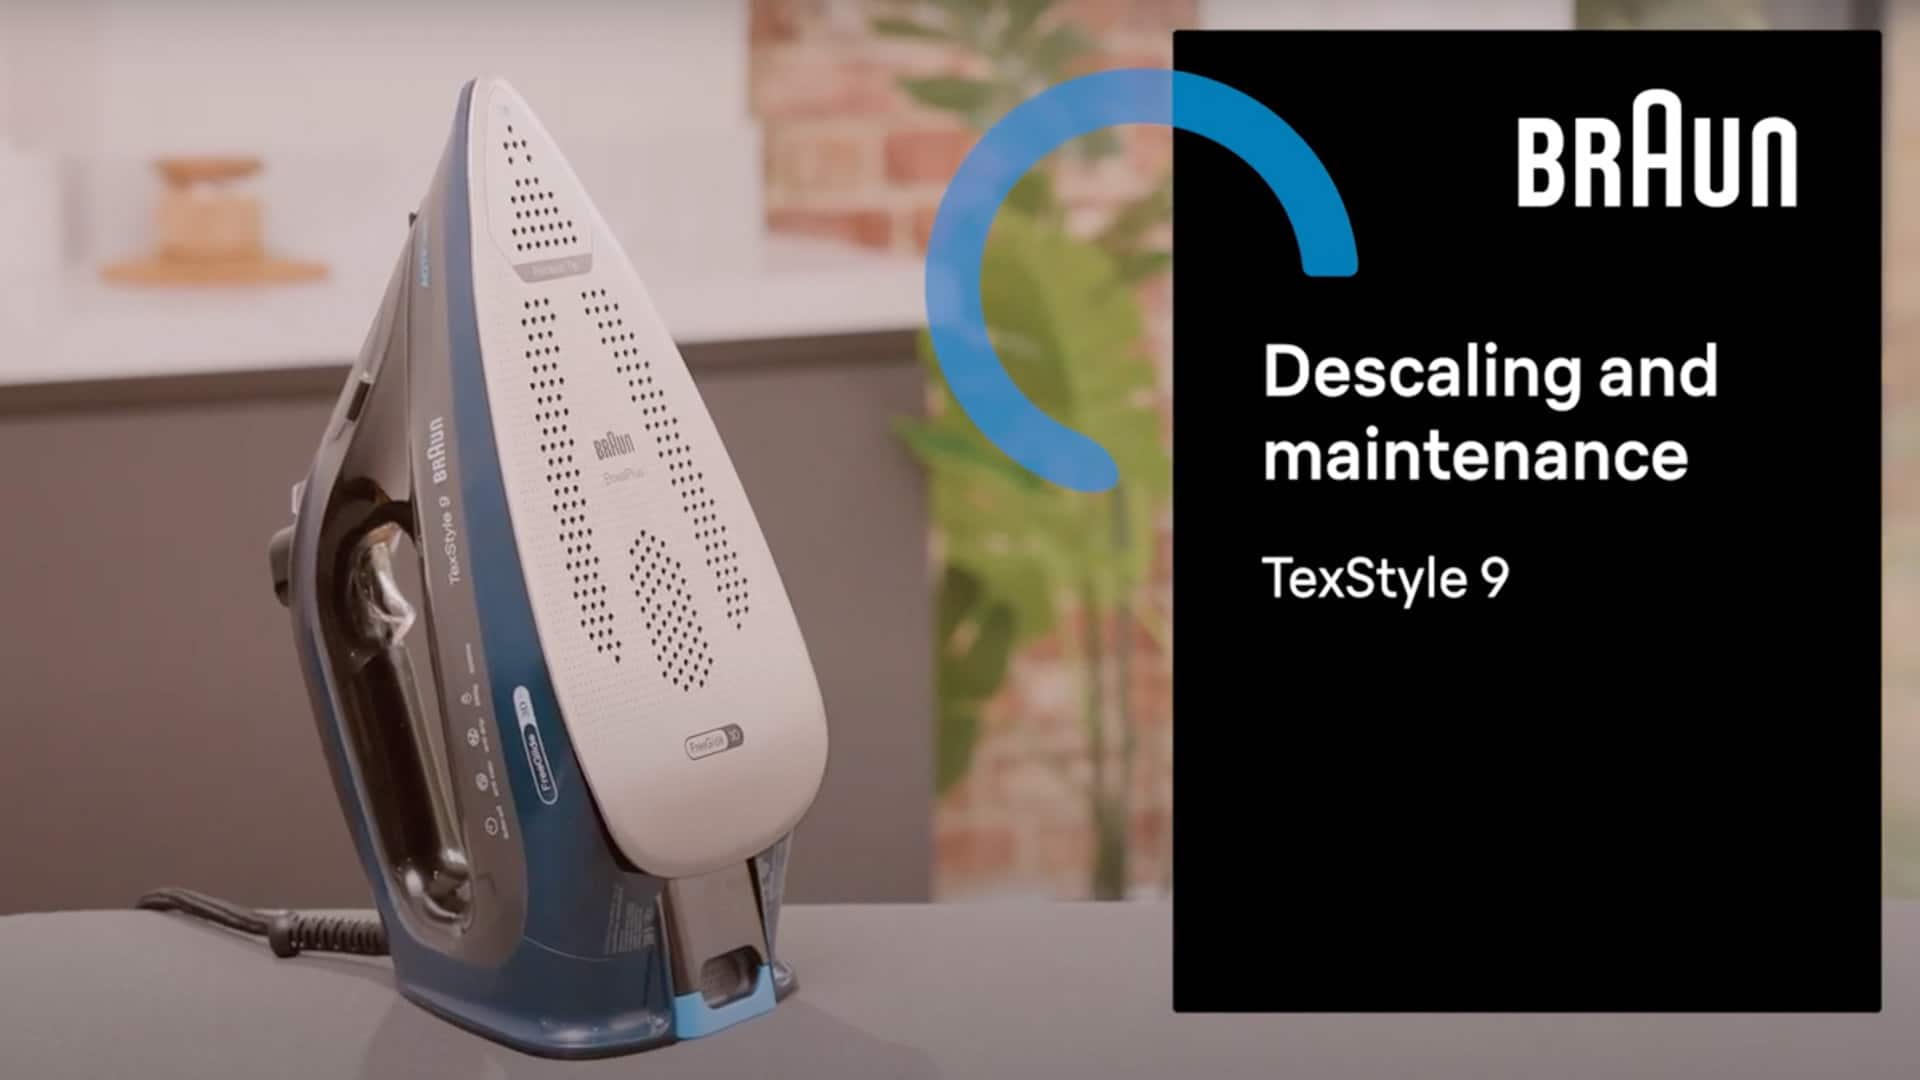 Braun TexStyle 9 How to –Descaling and maintenance